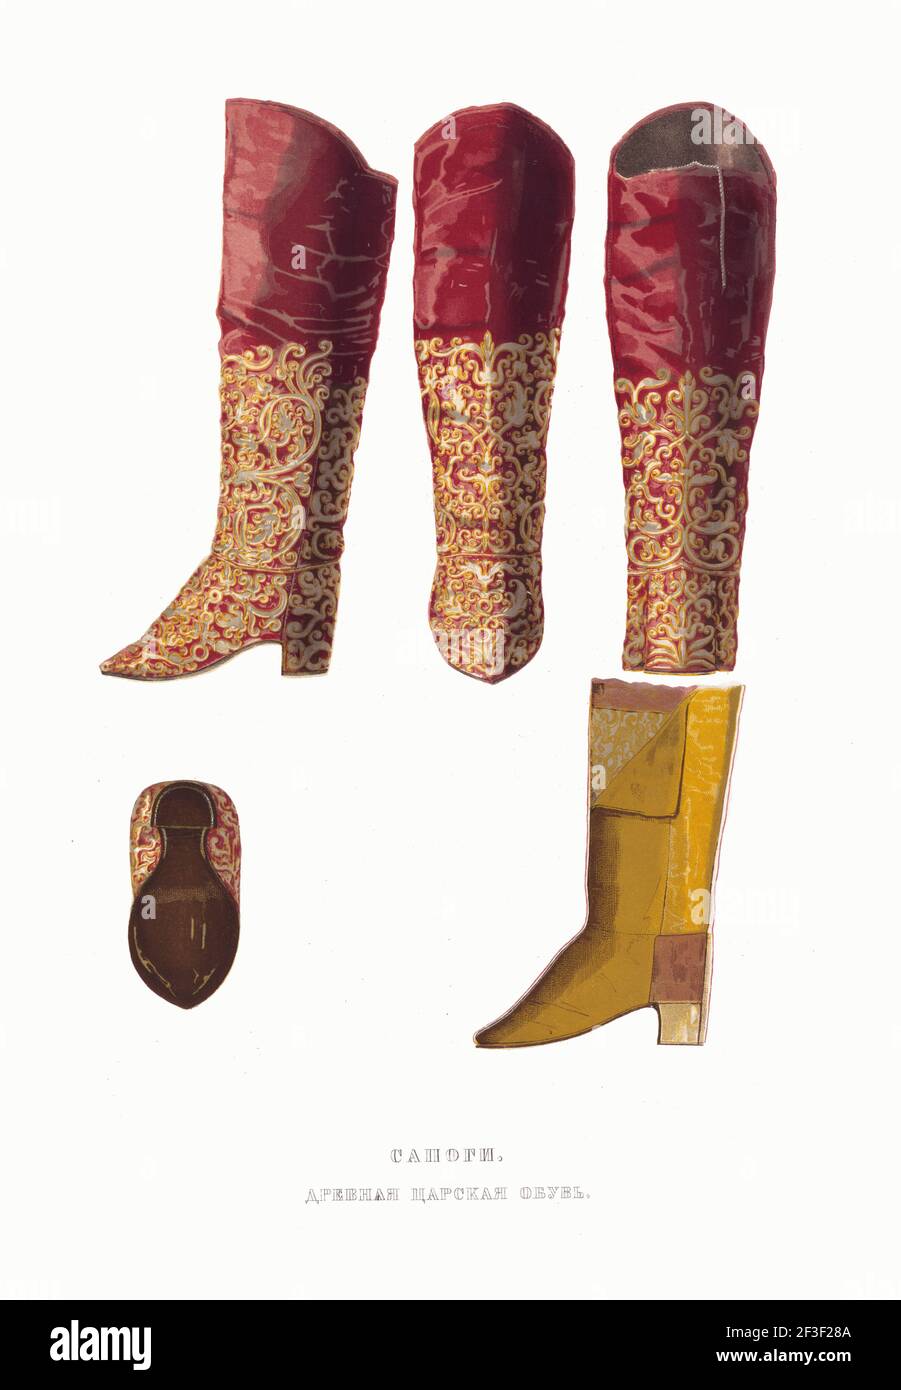 Tsar boot. From the Antiquities of the Russian State, 1849-1853. Private Collection. Stock Photo